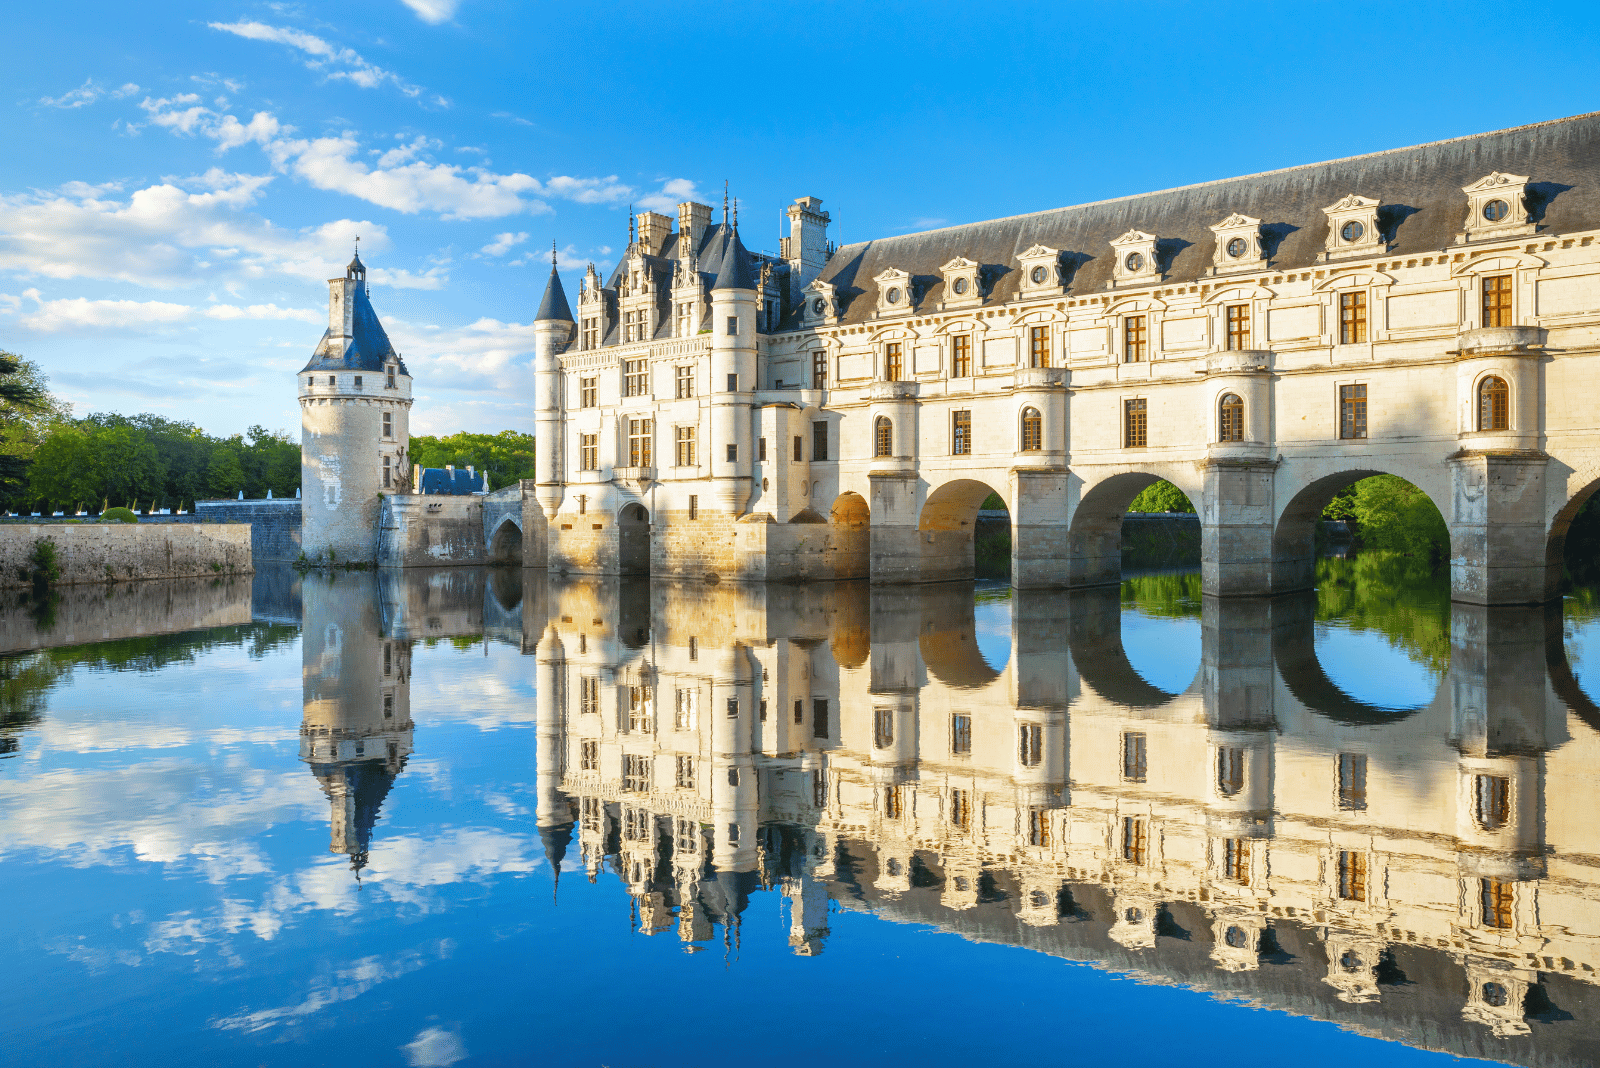 Chenonceau Chateau in the Loire Valley, France